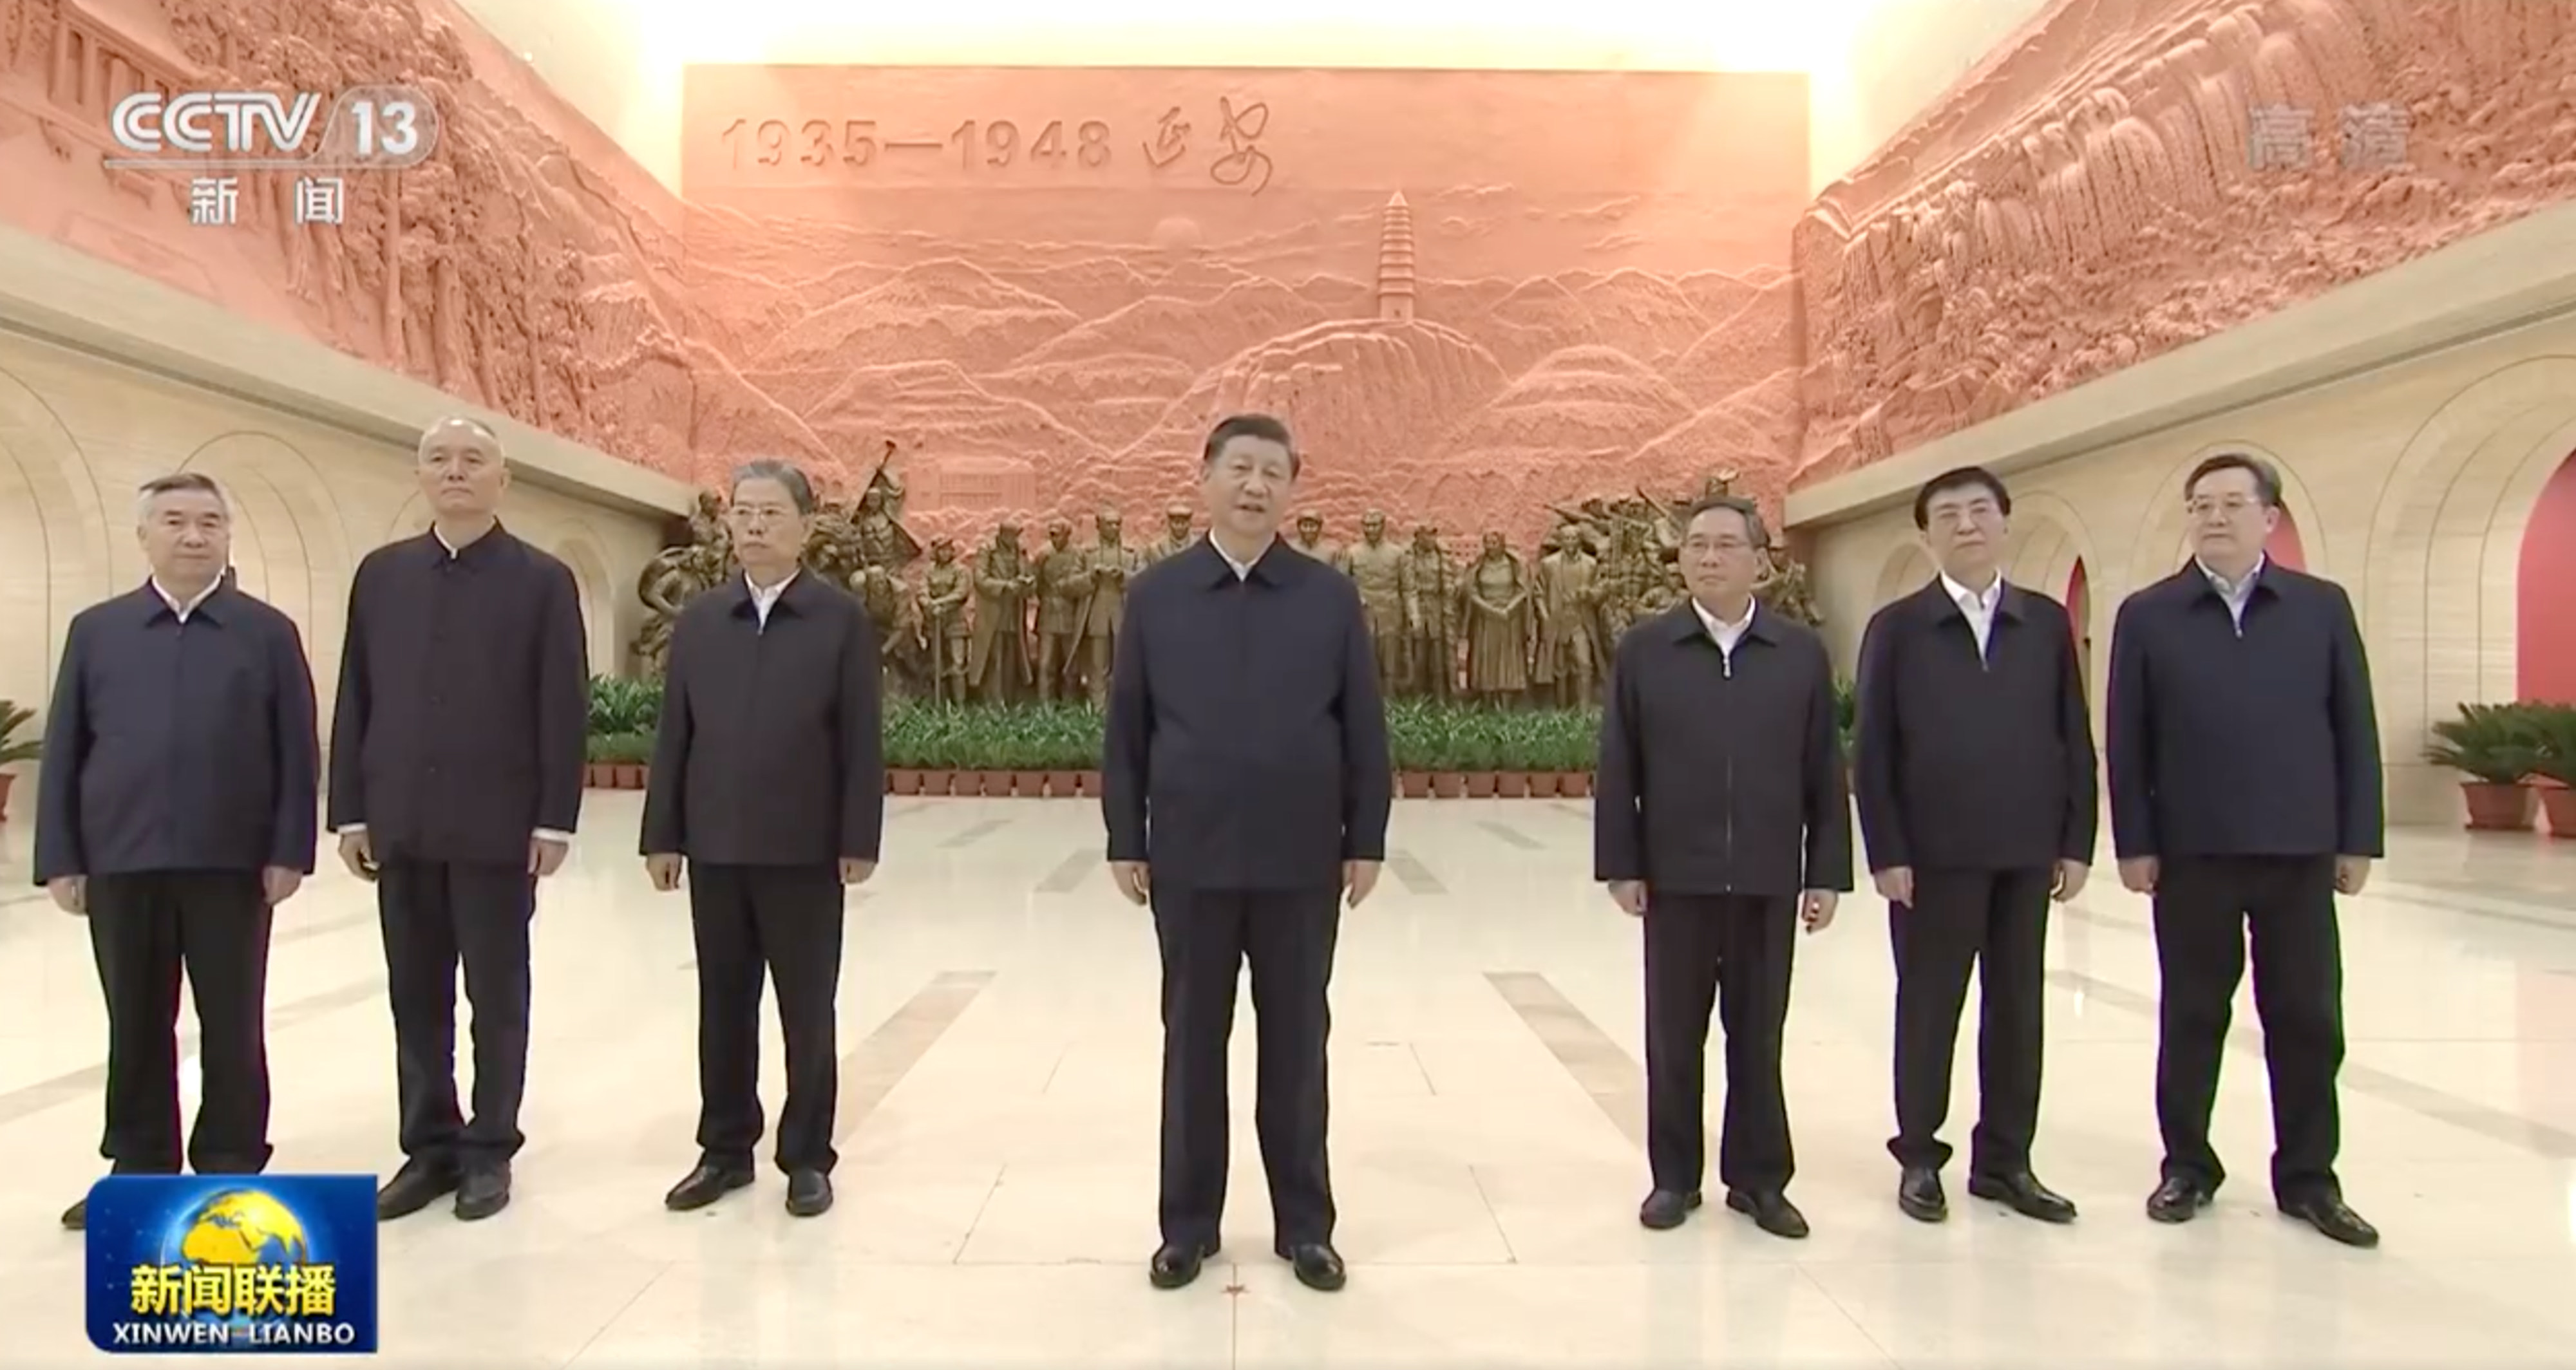 President Xi Jinping with members of China’s new Politburo Standing Committee in Yanan, in northwestern Shaanxi province. Photo: CCTV